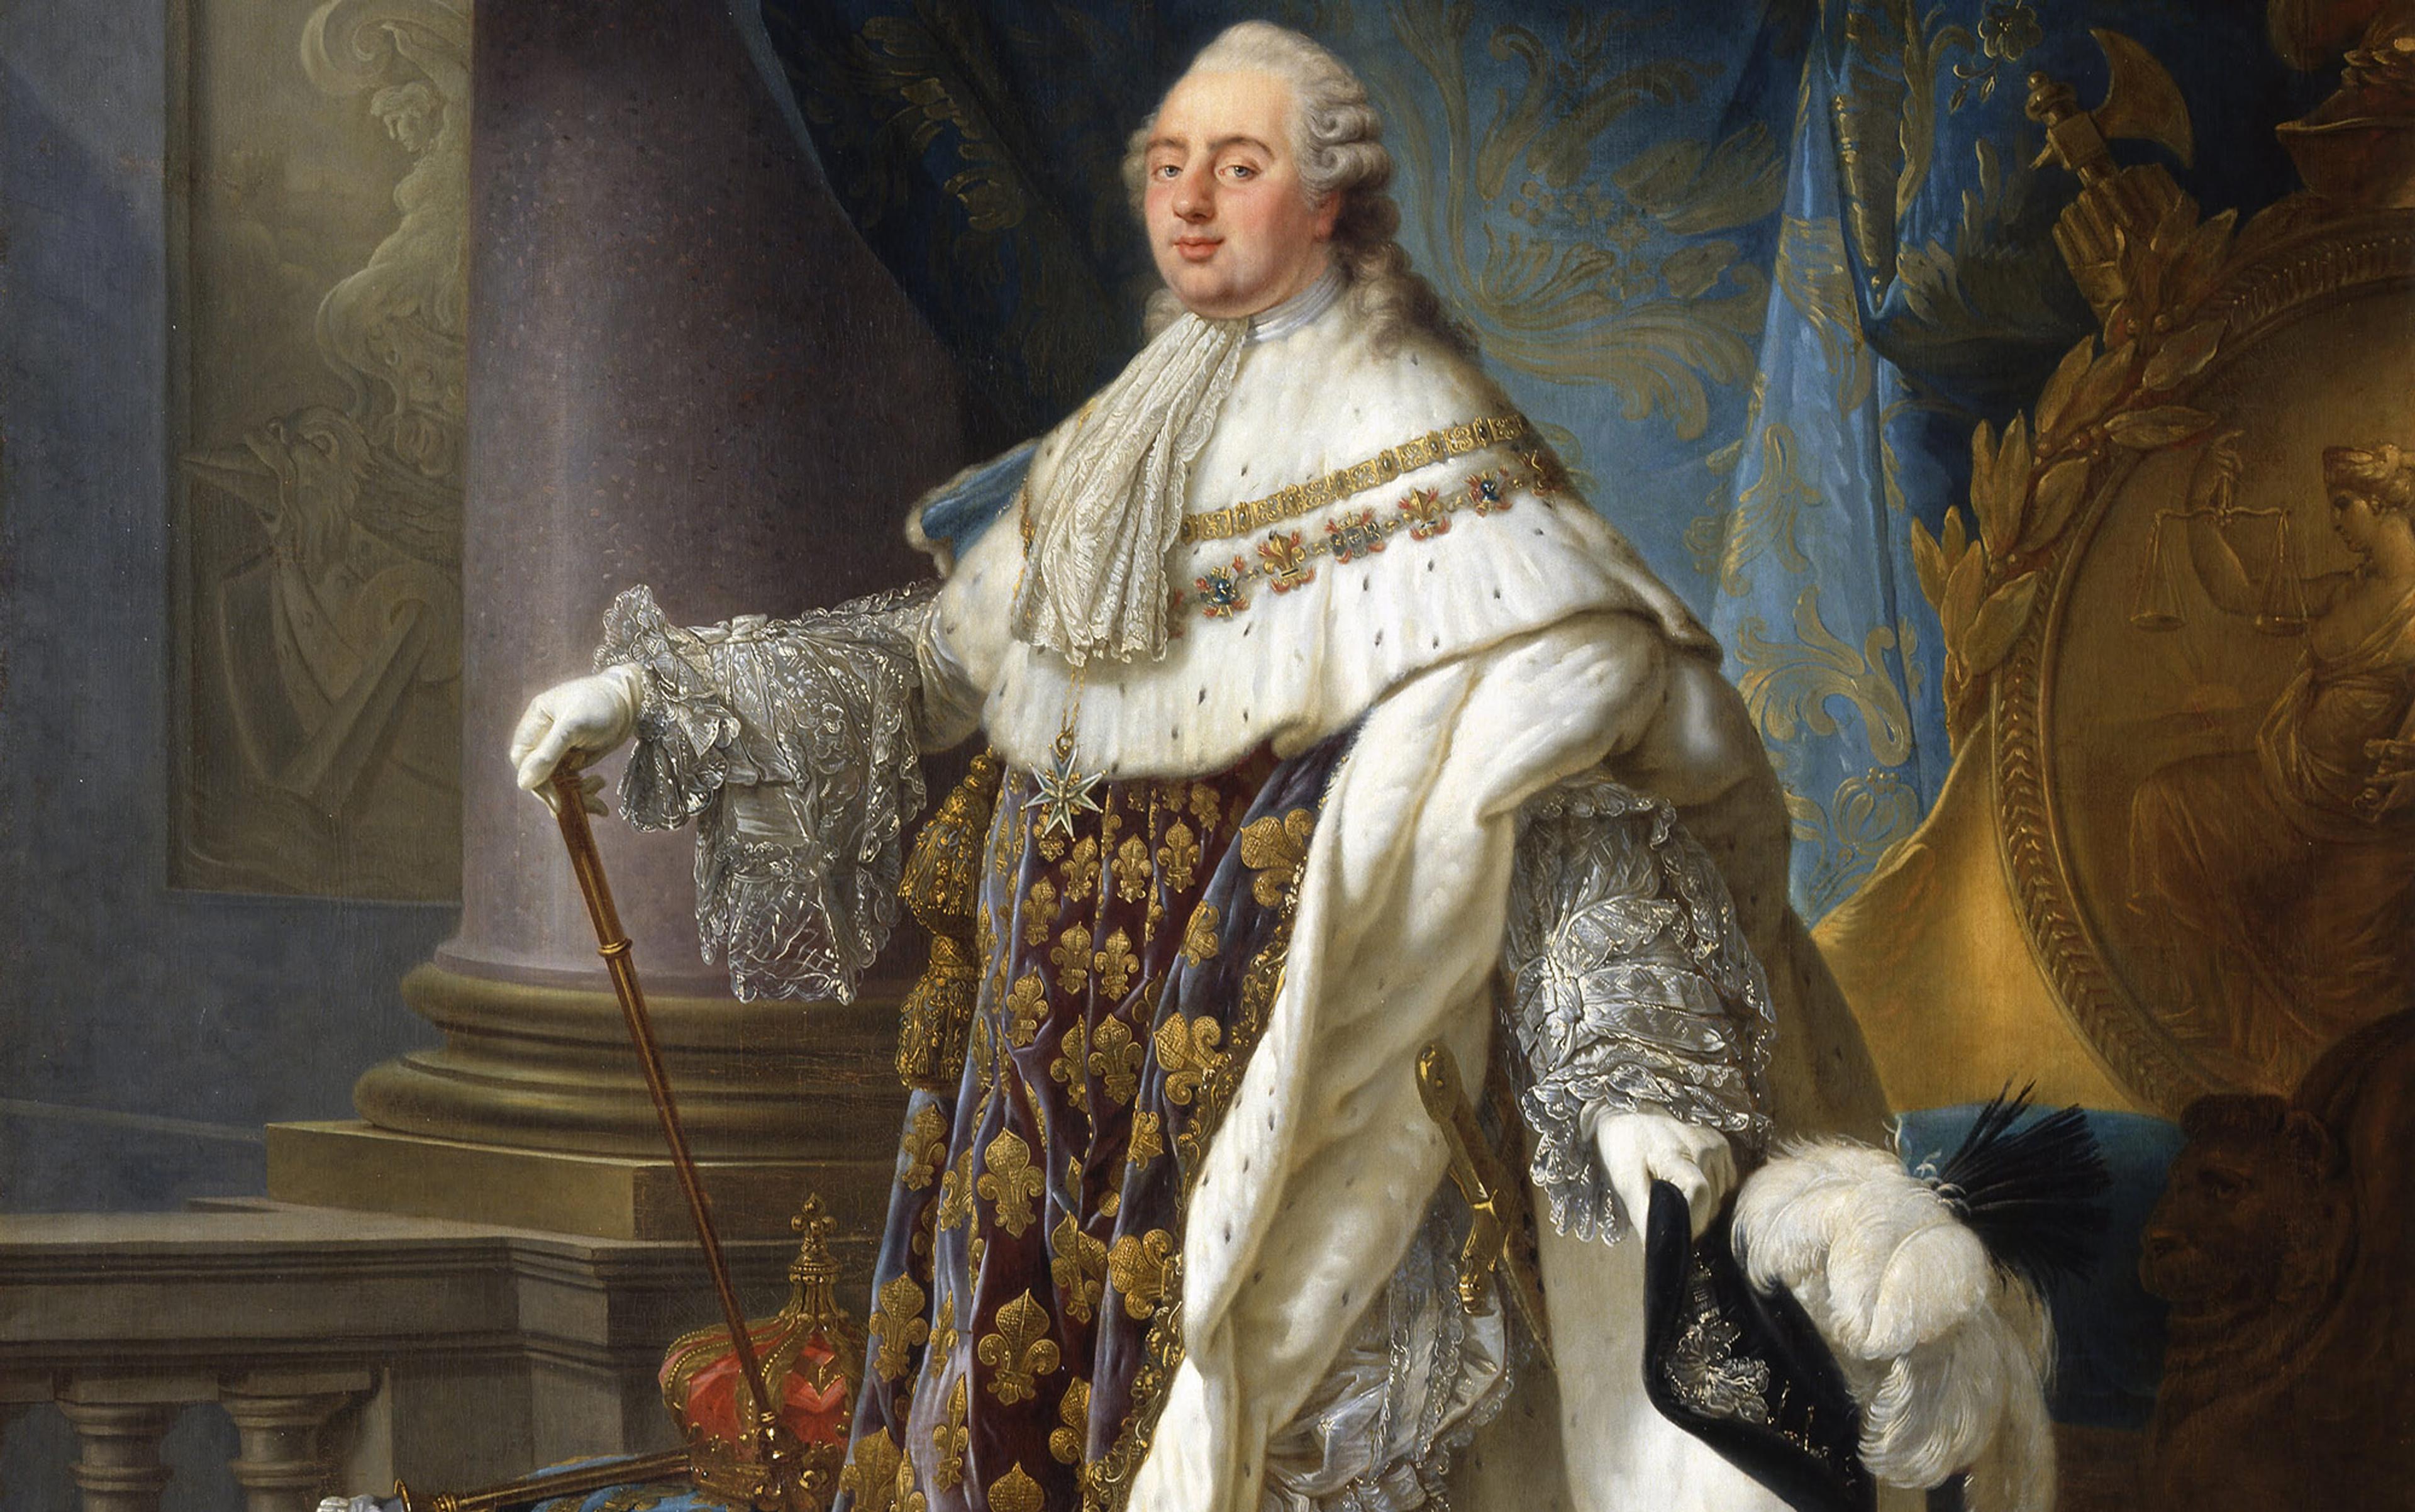 Painting of a royal figure in elaborate attire with a sceptre, crown, and ornate background featuring a pillar and grand drapery.